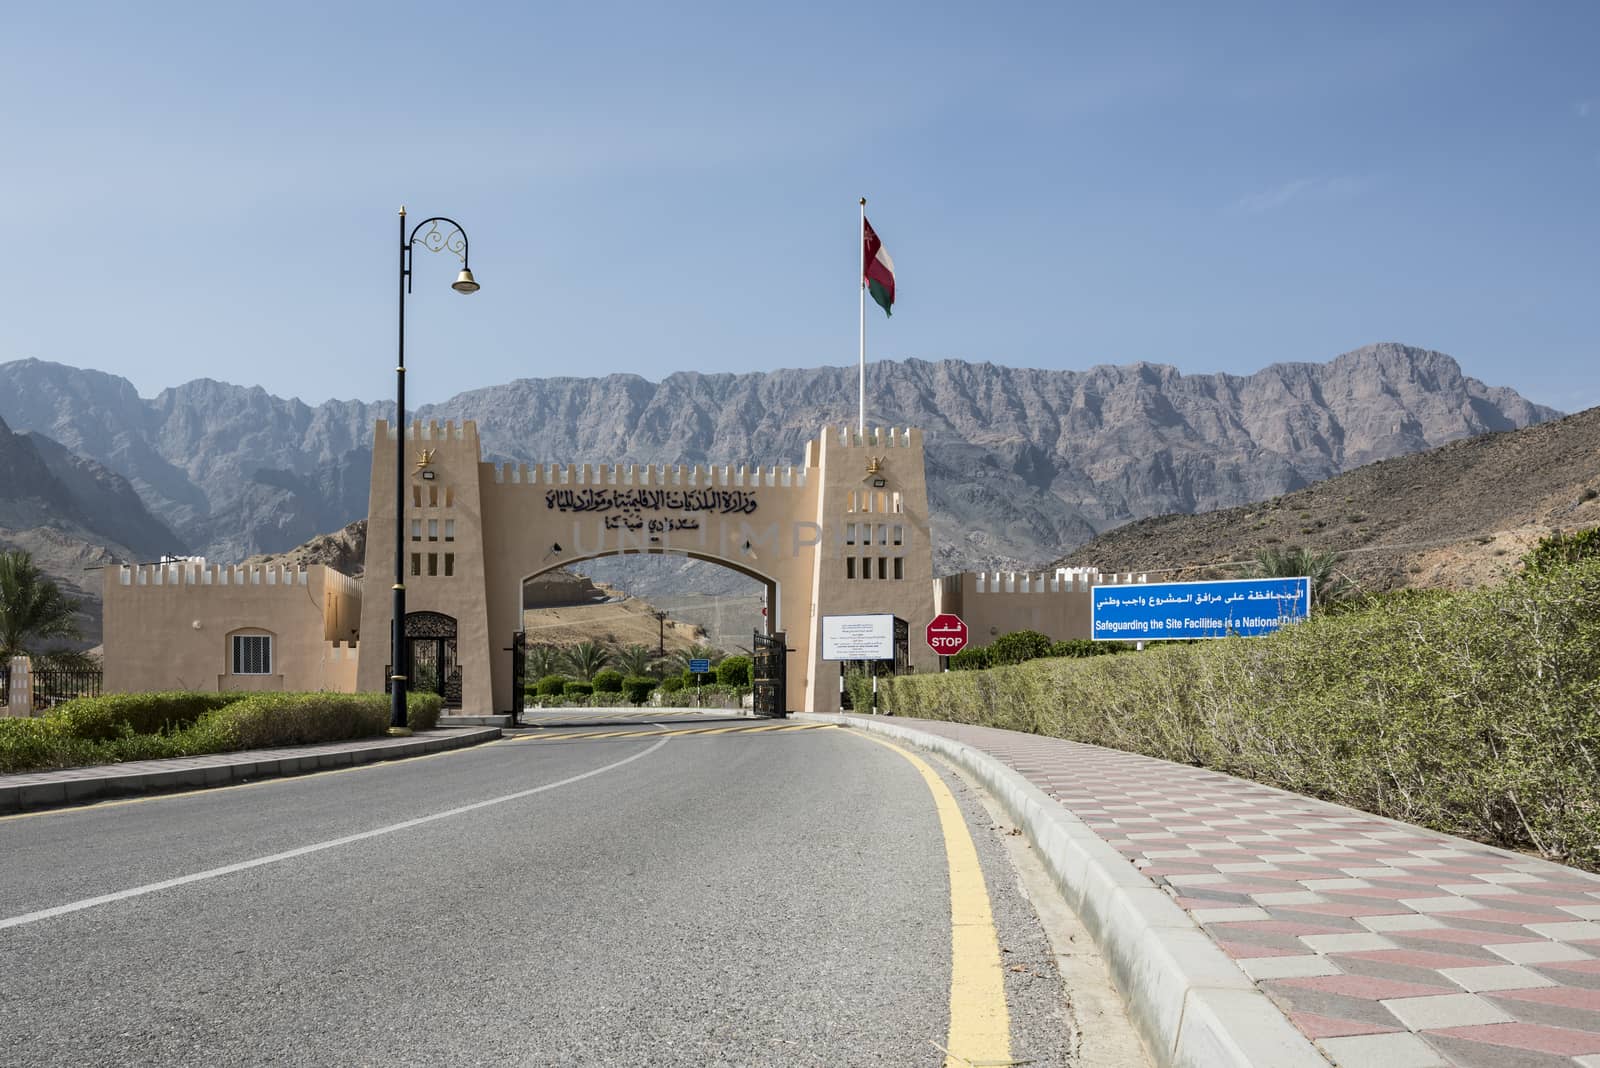 Main Entrance and security gate of Wadi Dayqah Dam, Sultanate of Oman